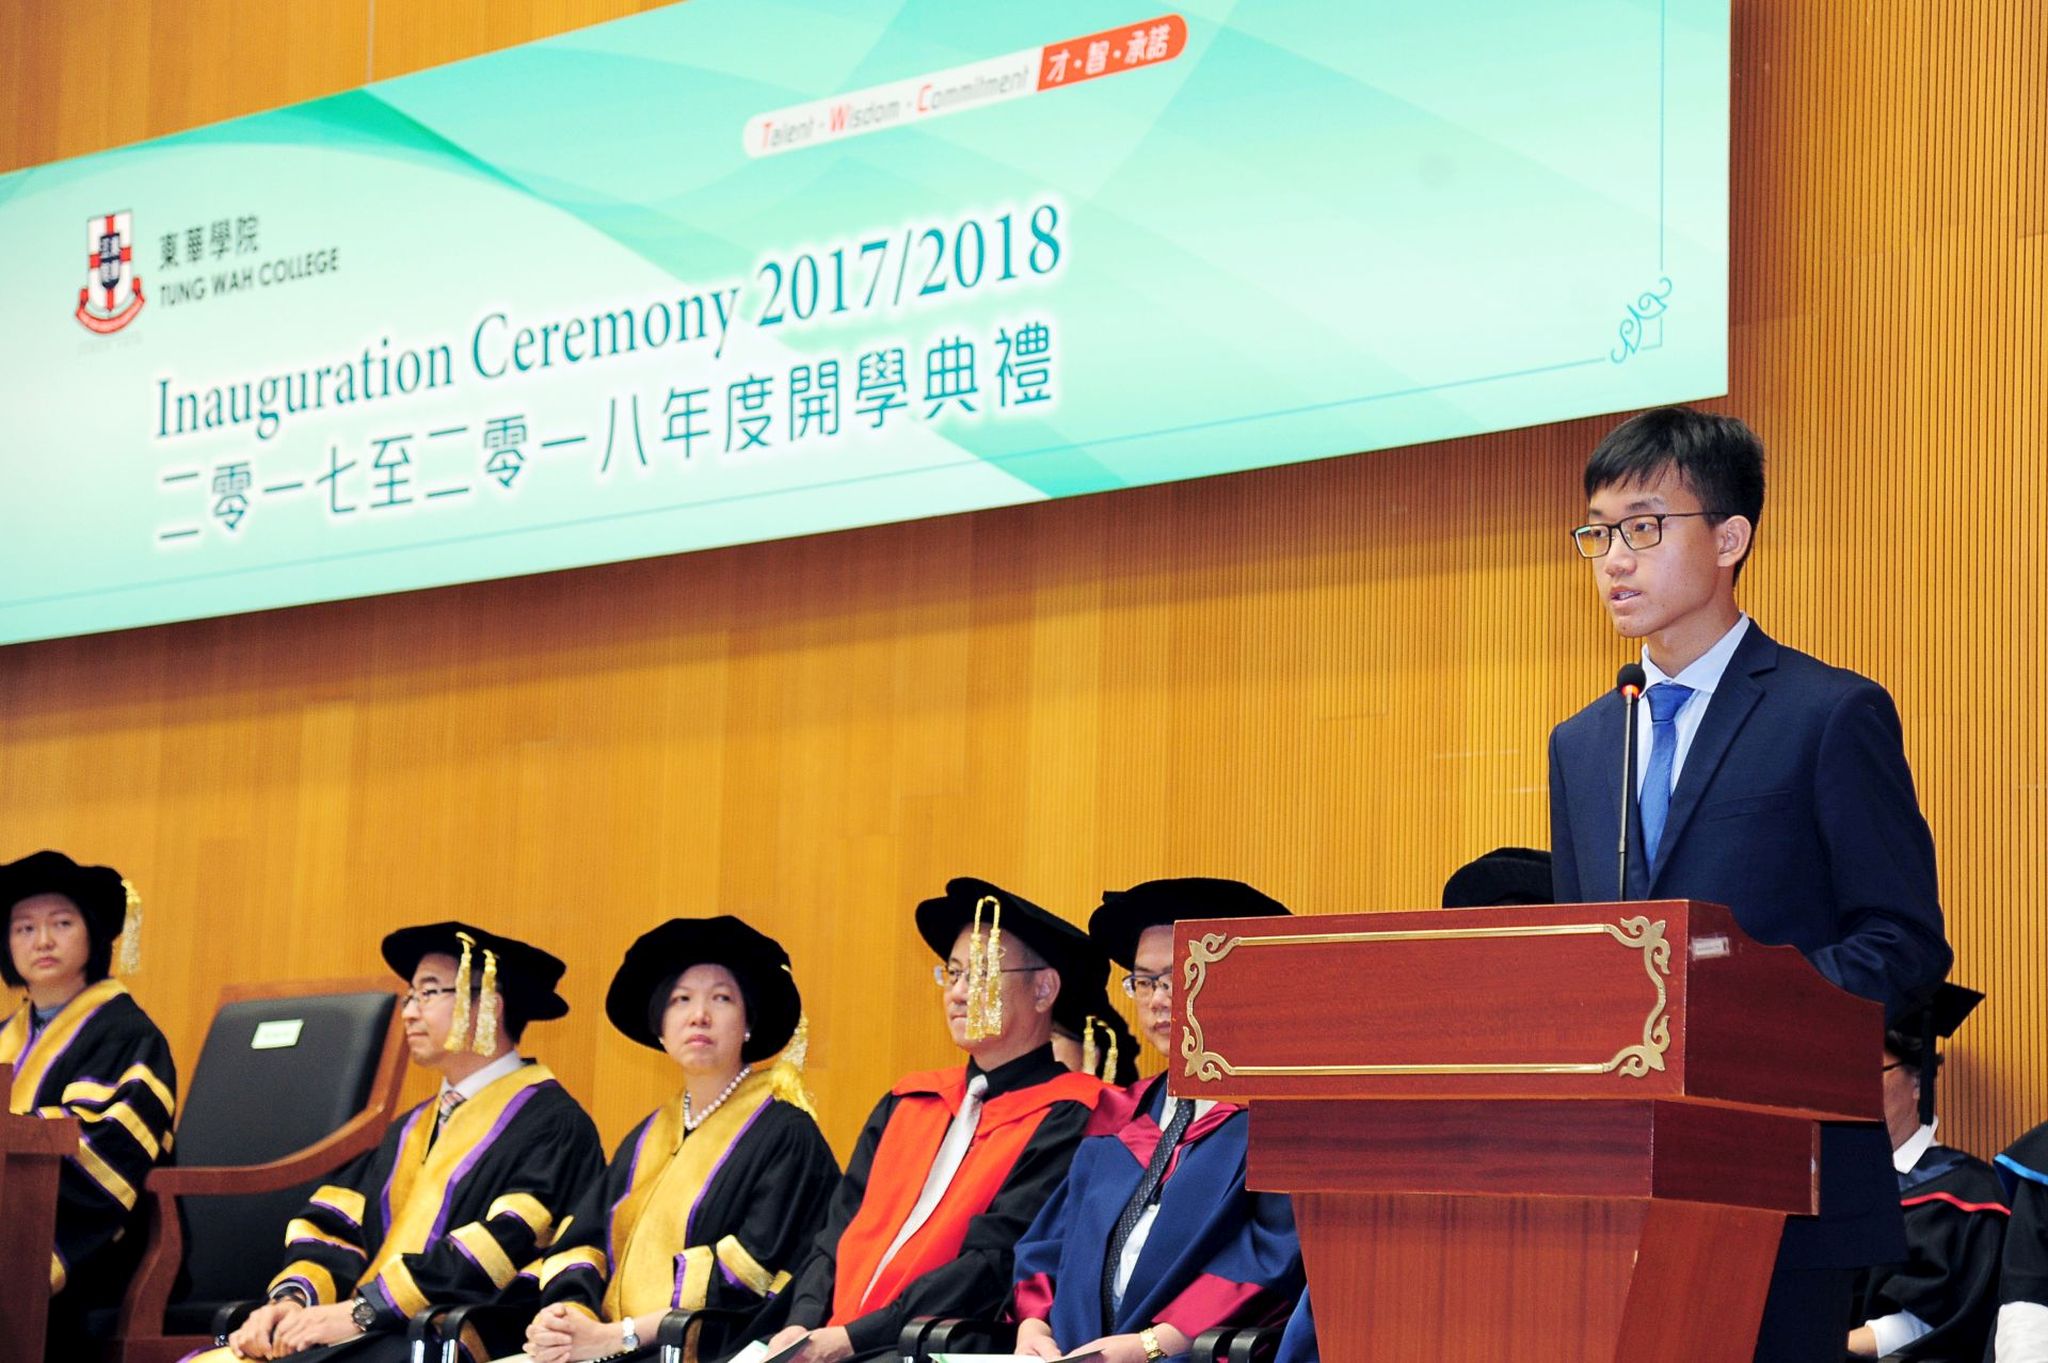 Tung Wah College Inauguration Ceremony 2017/2018